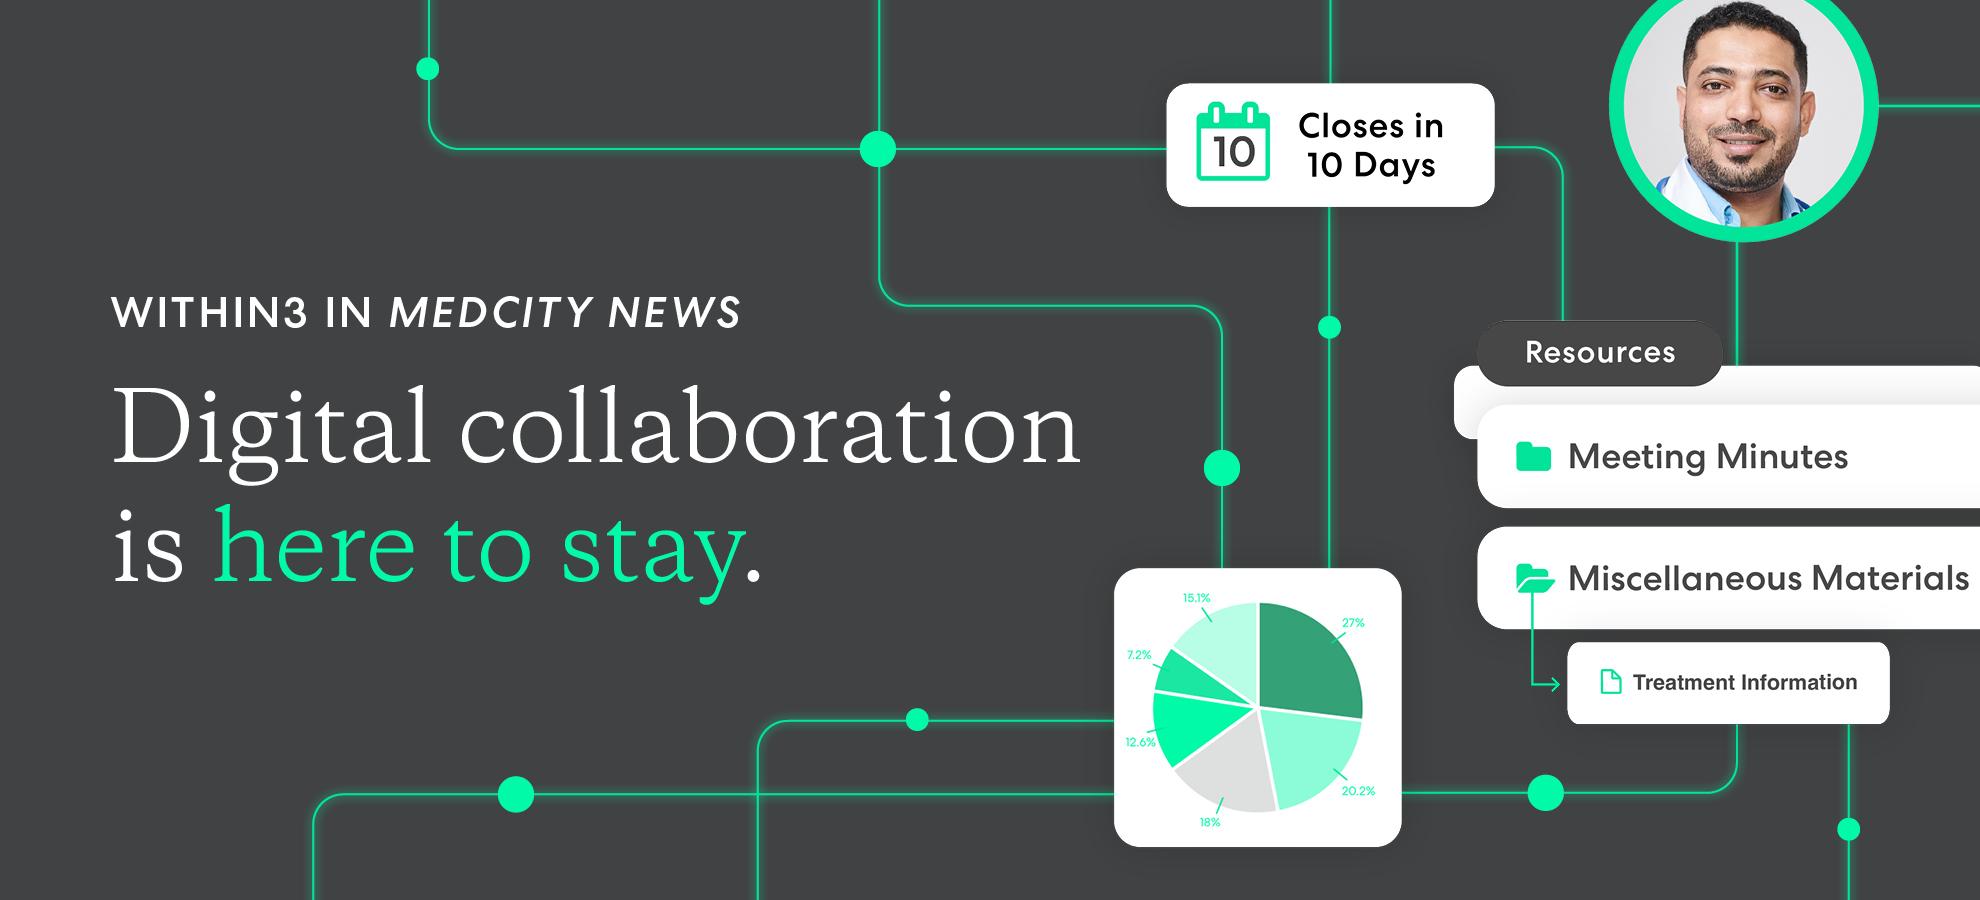 Within3 in MedCityNews: Digital collaboration here to stay for Pfizer, Merck, others